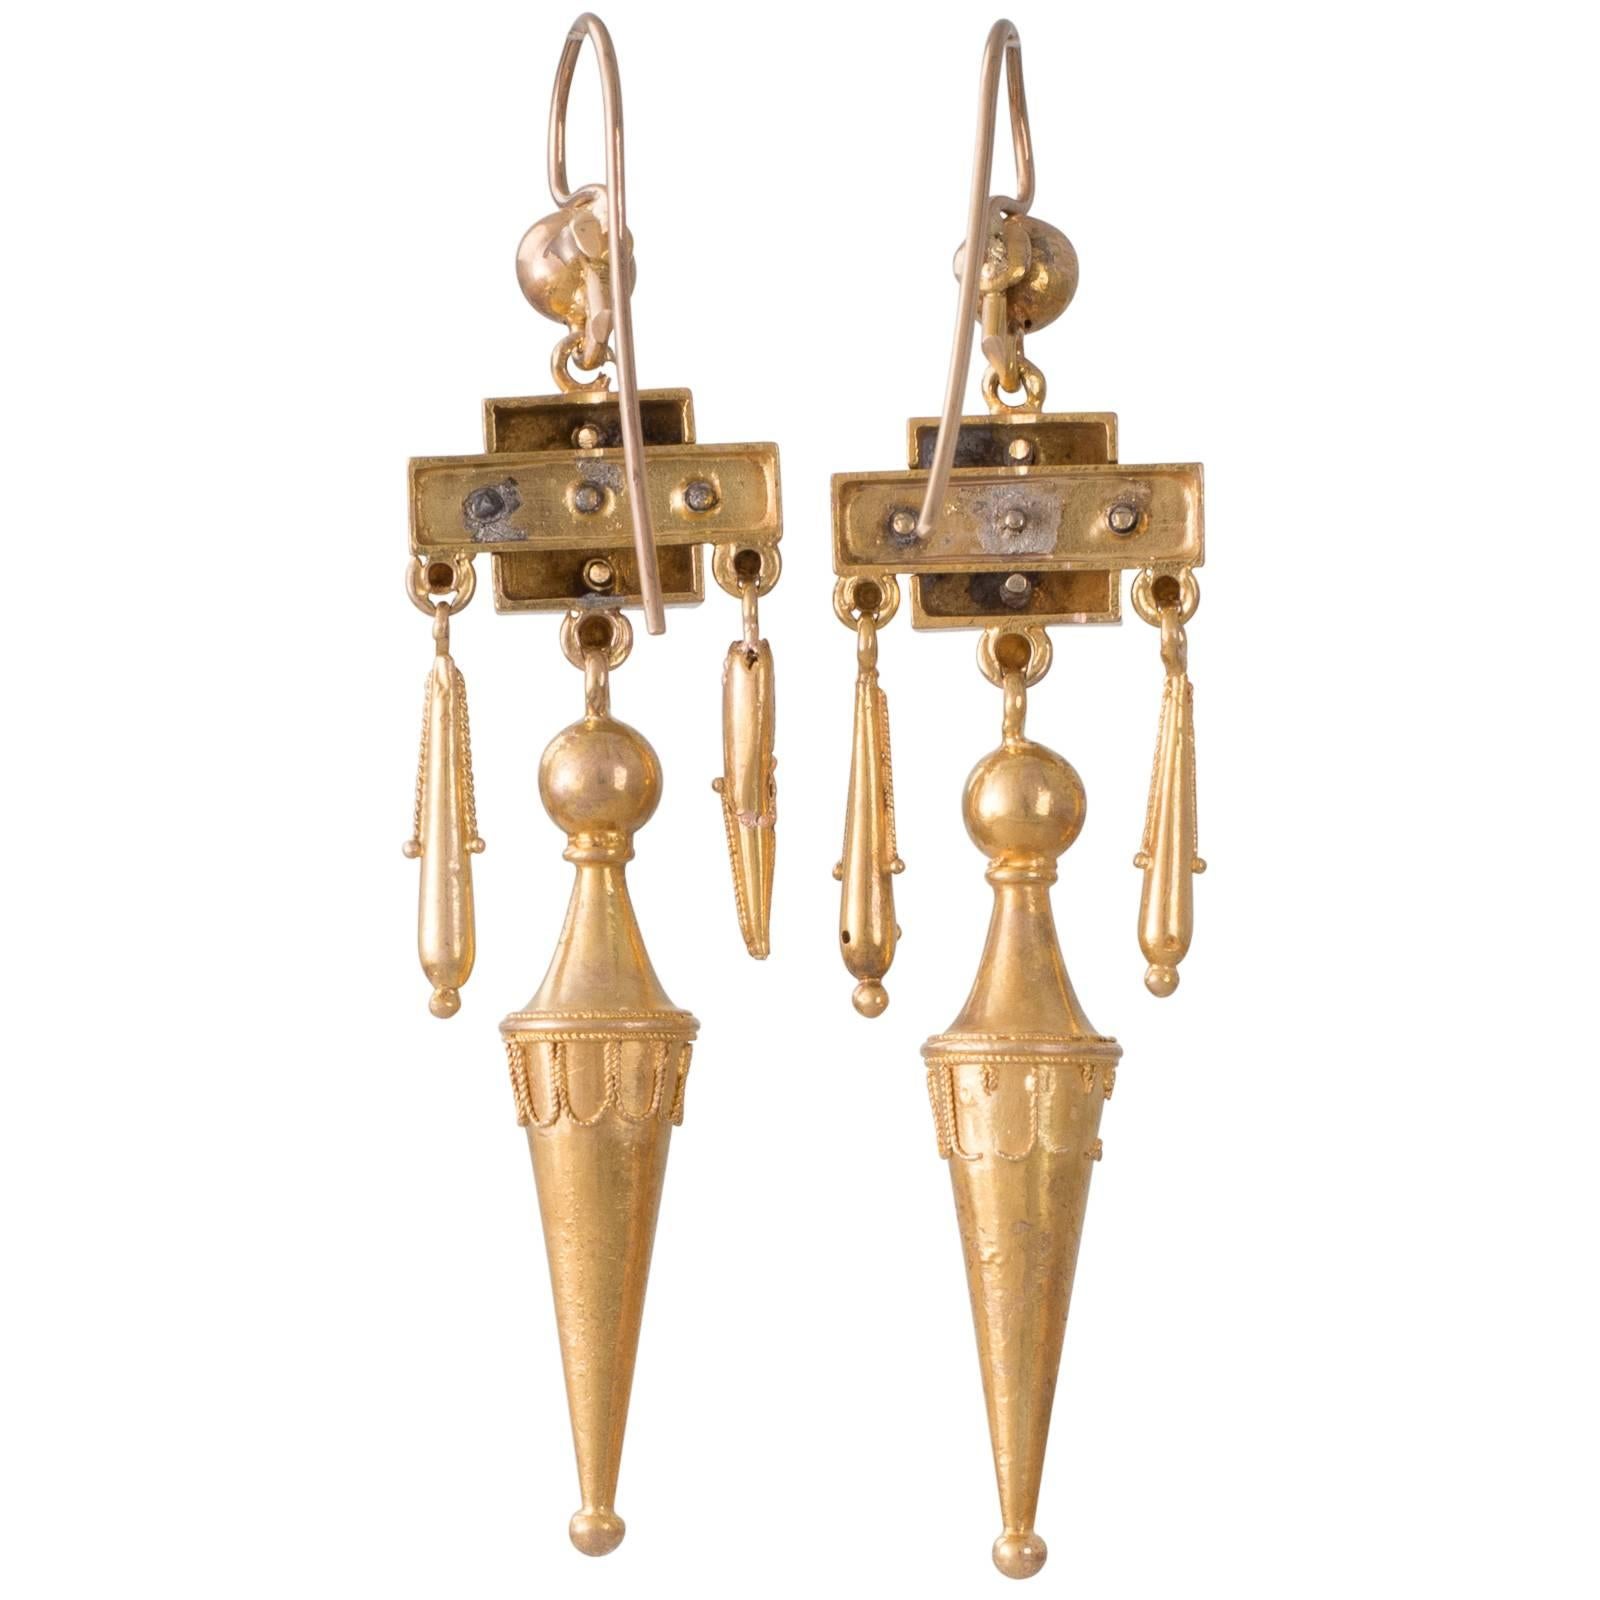 A pair of 14ct yellow gold Victorian drop earrings each with a long pointed drop to the centre with a shorter pendulum to either side from a decorative box style top all sections decorated with fine bead and wirework from shepherd's hooks (added